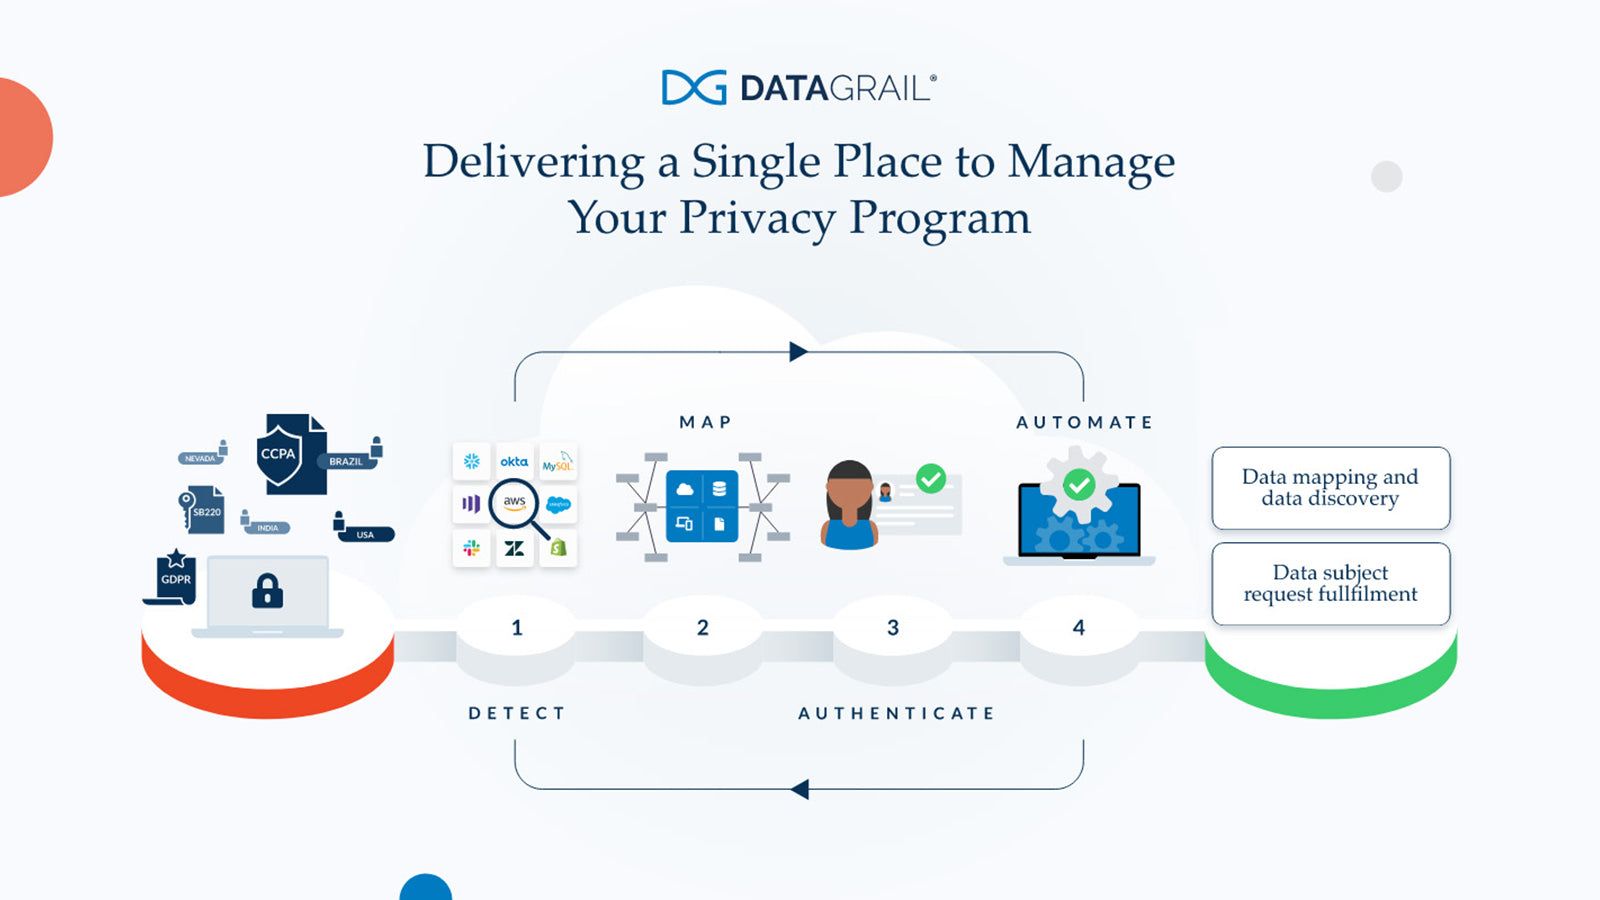 Delivering a single place to manage your privacy program